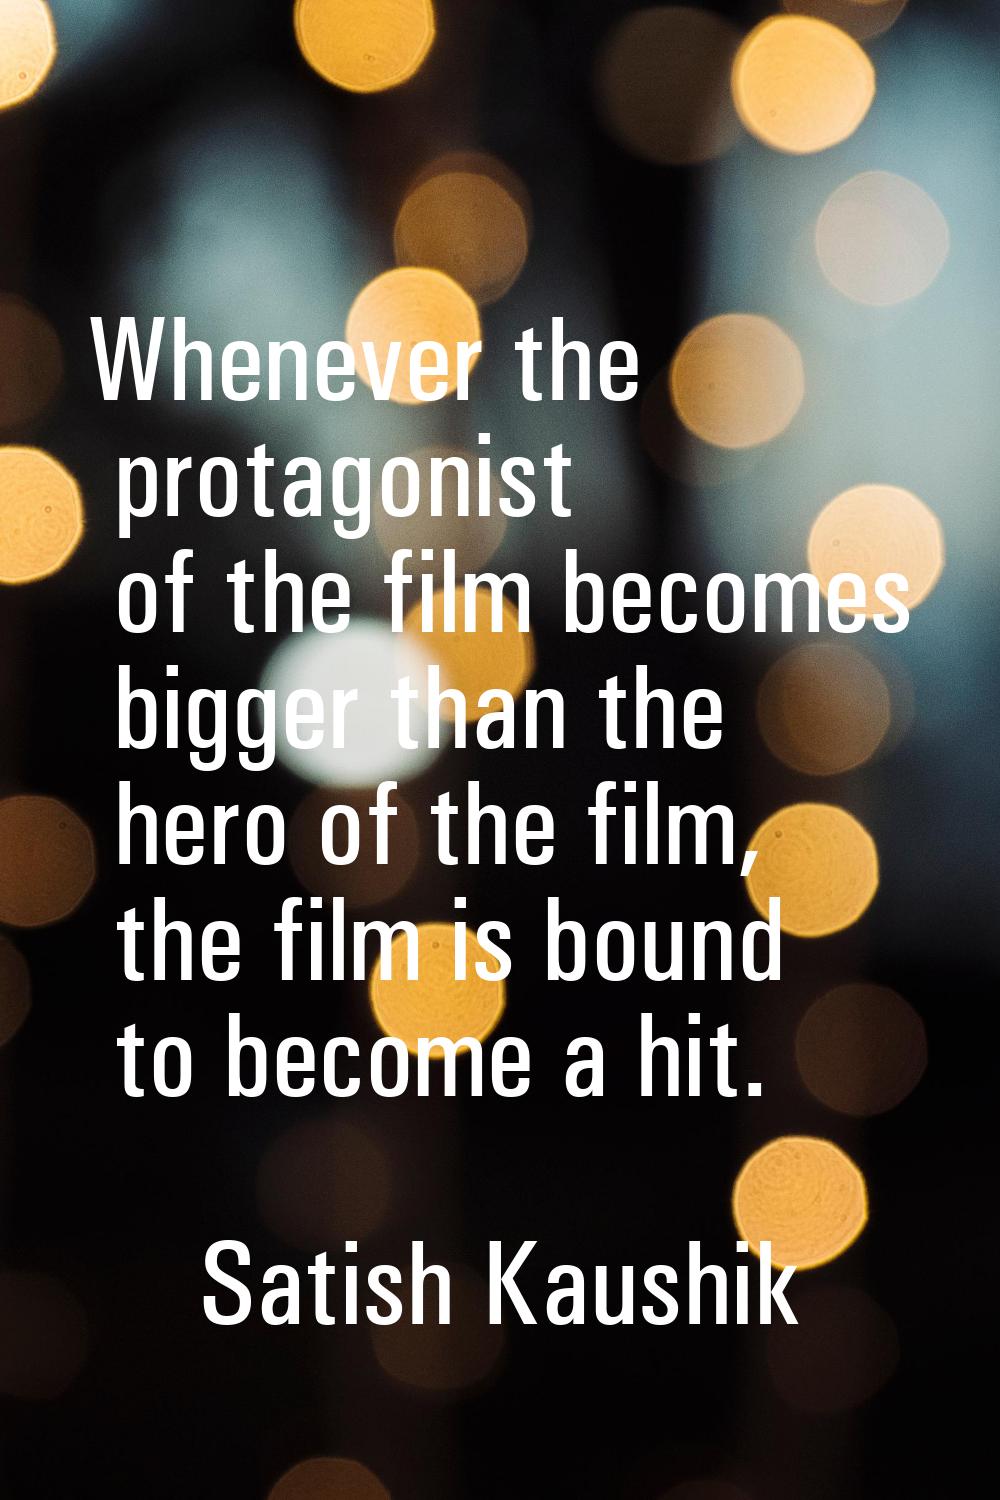 Whenever the protagonist of the film becomes bigger than the hero of the film, the film is bound to